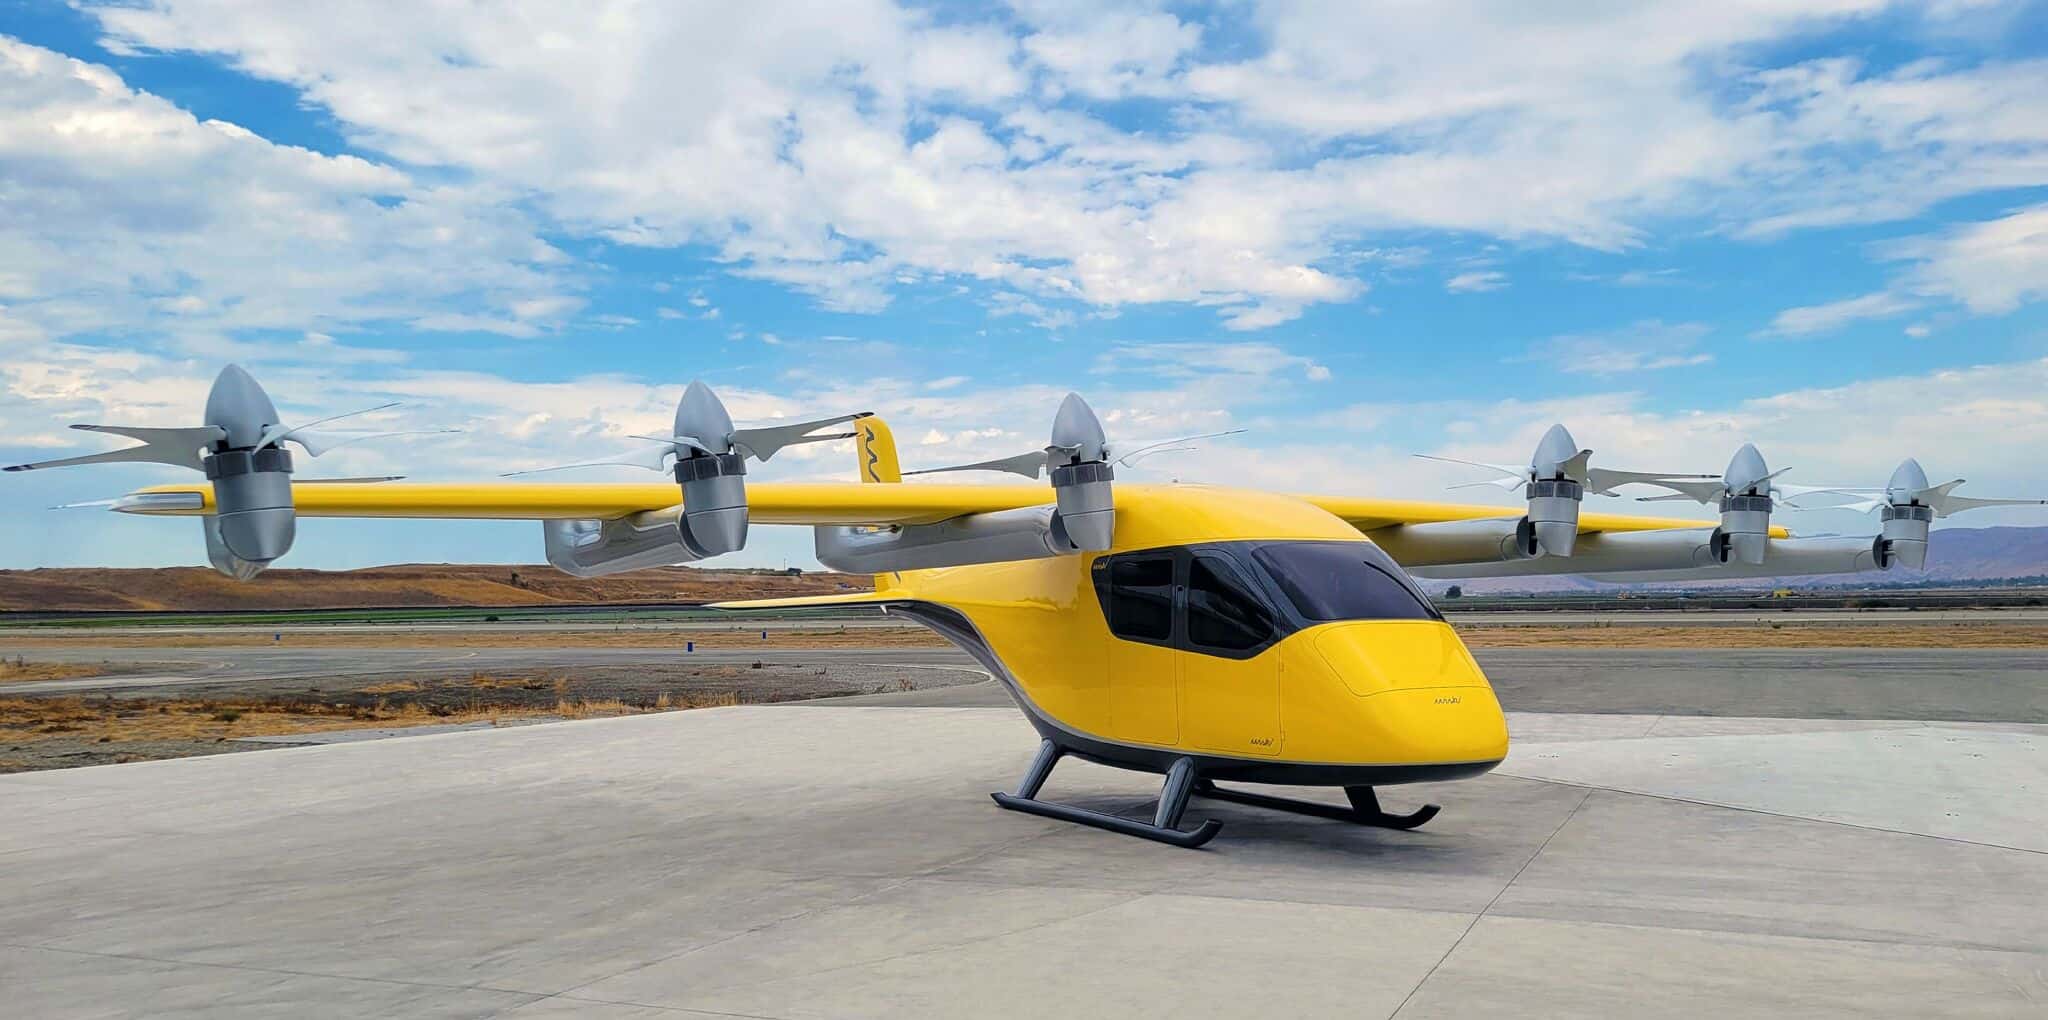 Pilotless air taxis Urban mobility Electric vertical takeoff Vertiports Smart city infrastructure